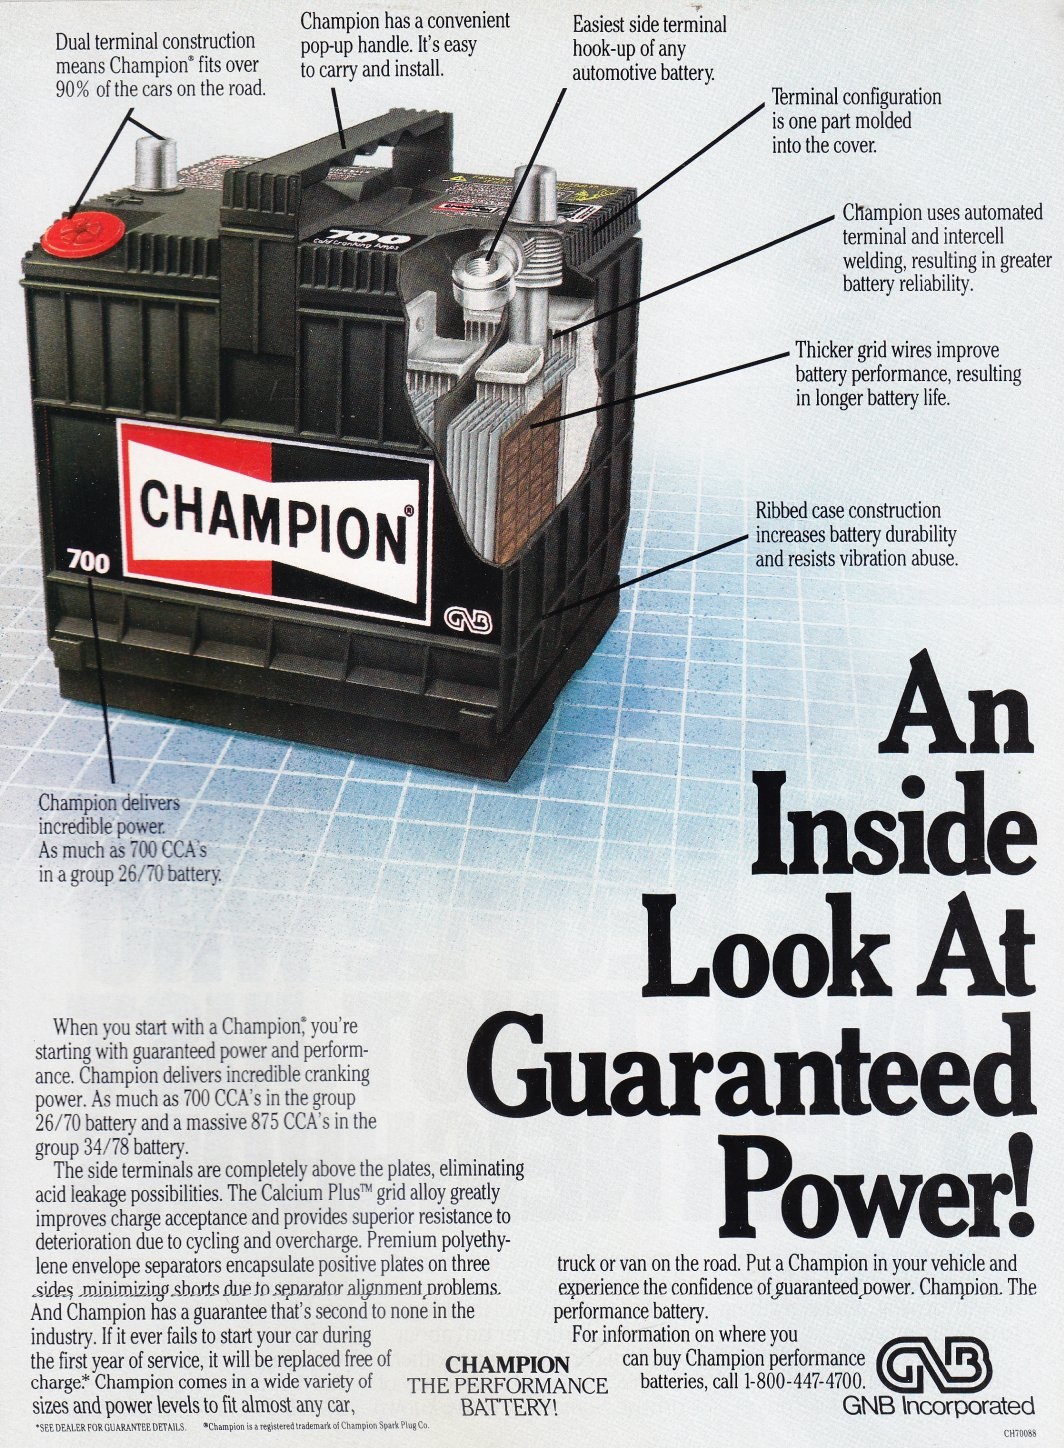 1995 champion battery made by gnb